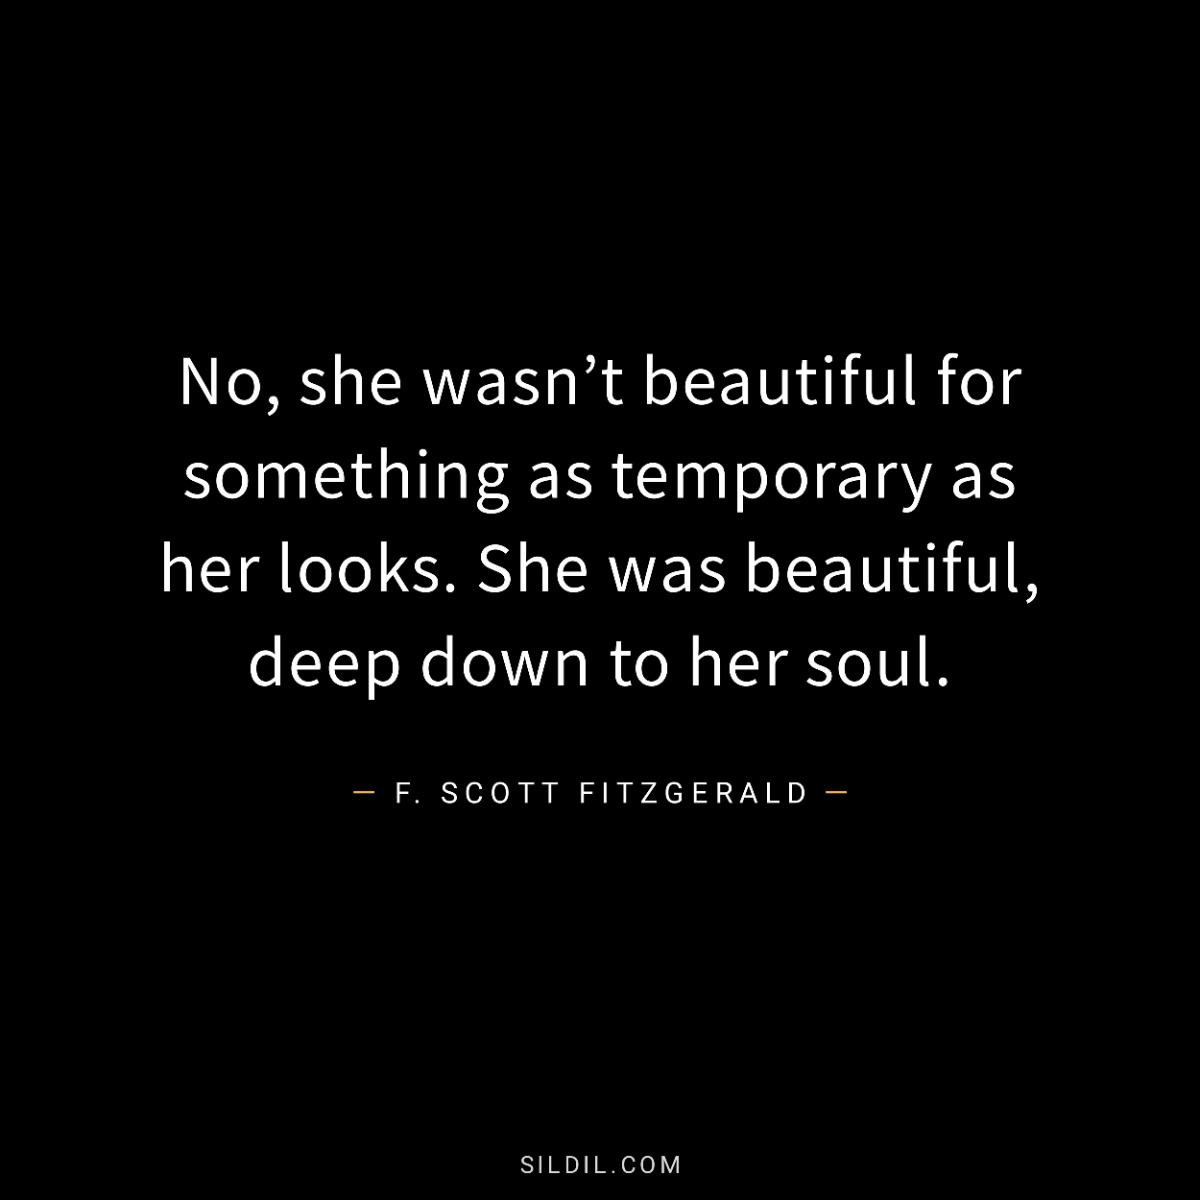 No, she wasn’t beautiful for something as temporary as her looks. She was beautiful, deep down to her soul.